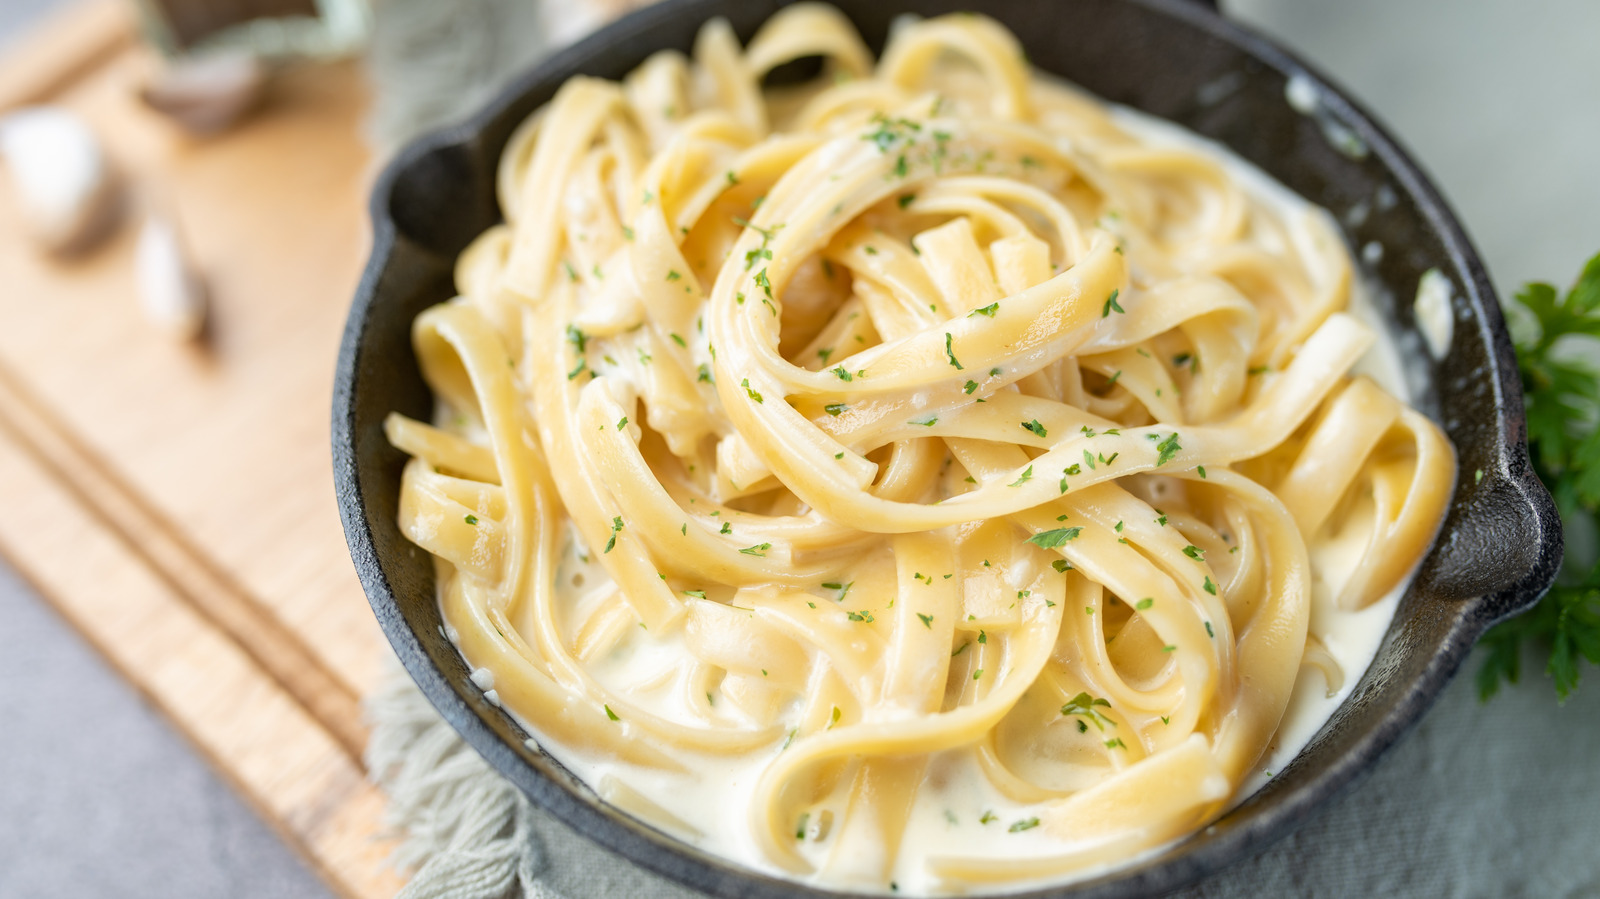 This Restaurant Introduced Fettuccine Alfredo To The US